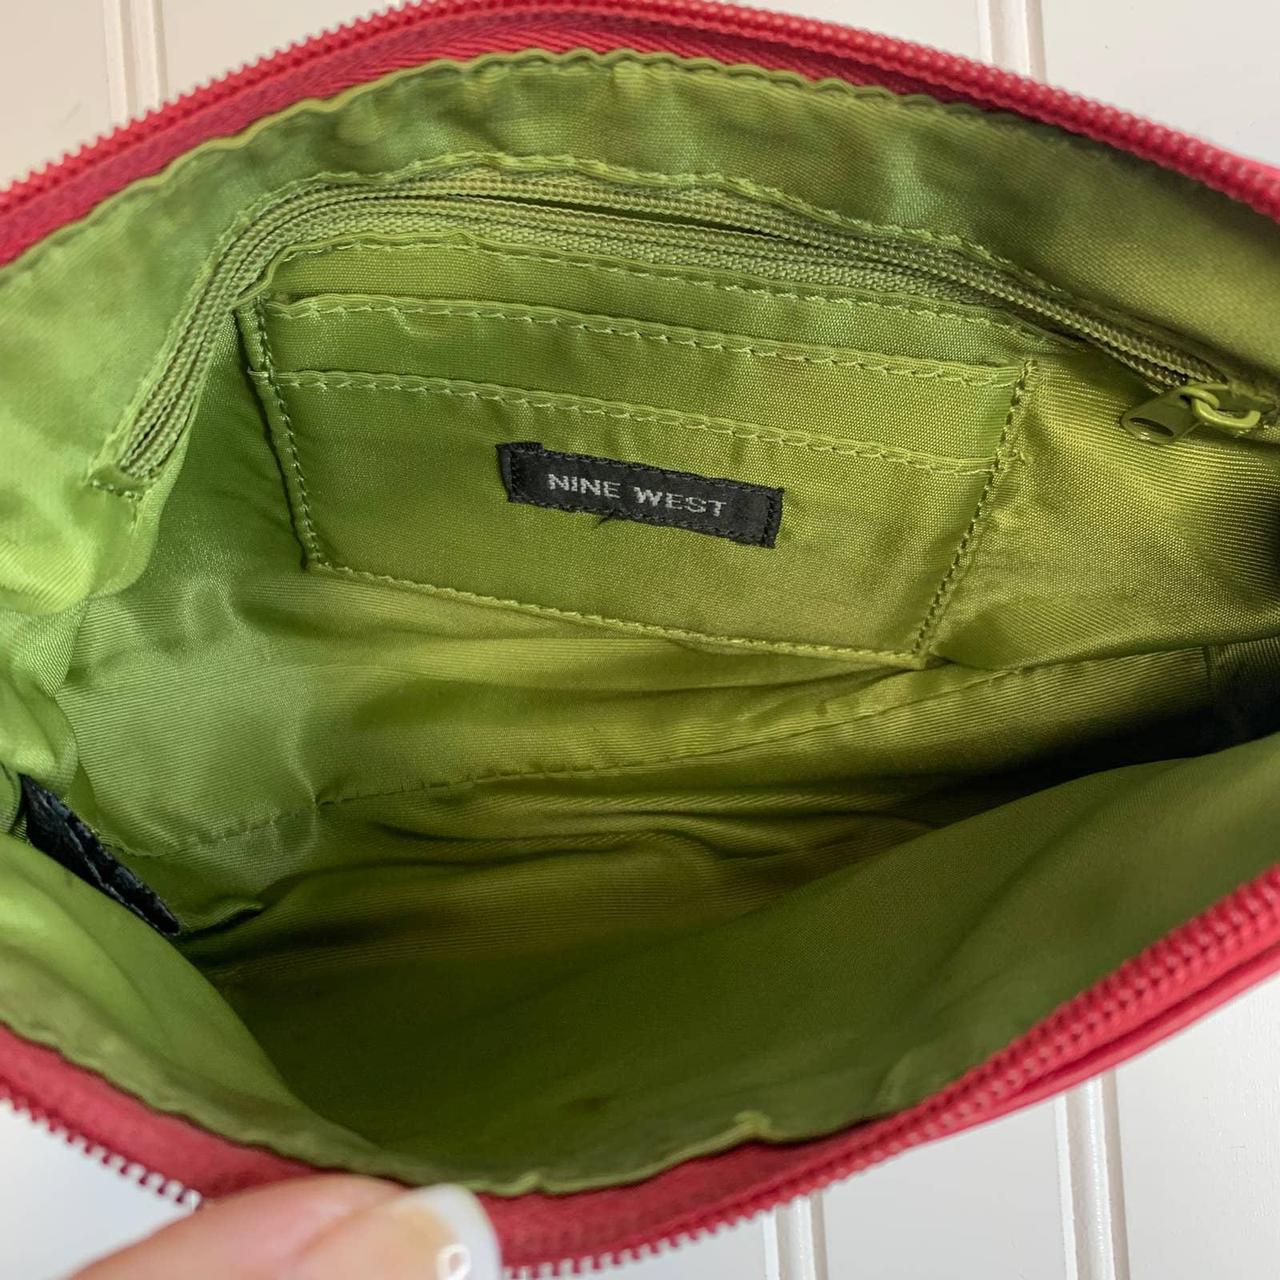 monogram y2k bag, some scuffing but in good - Depop